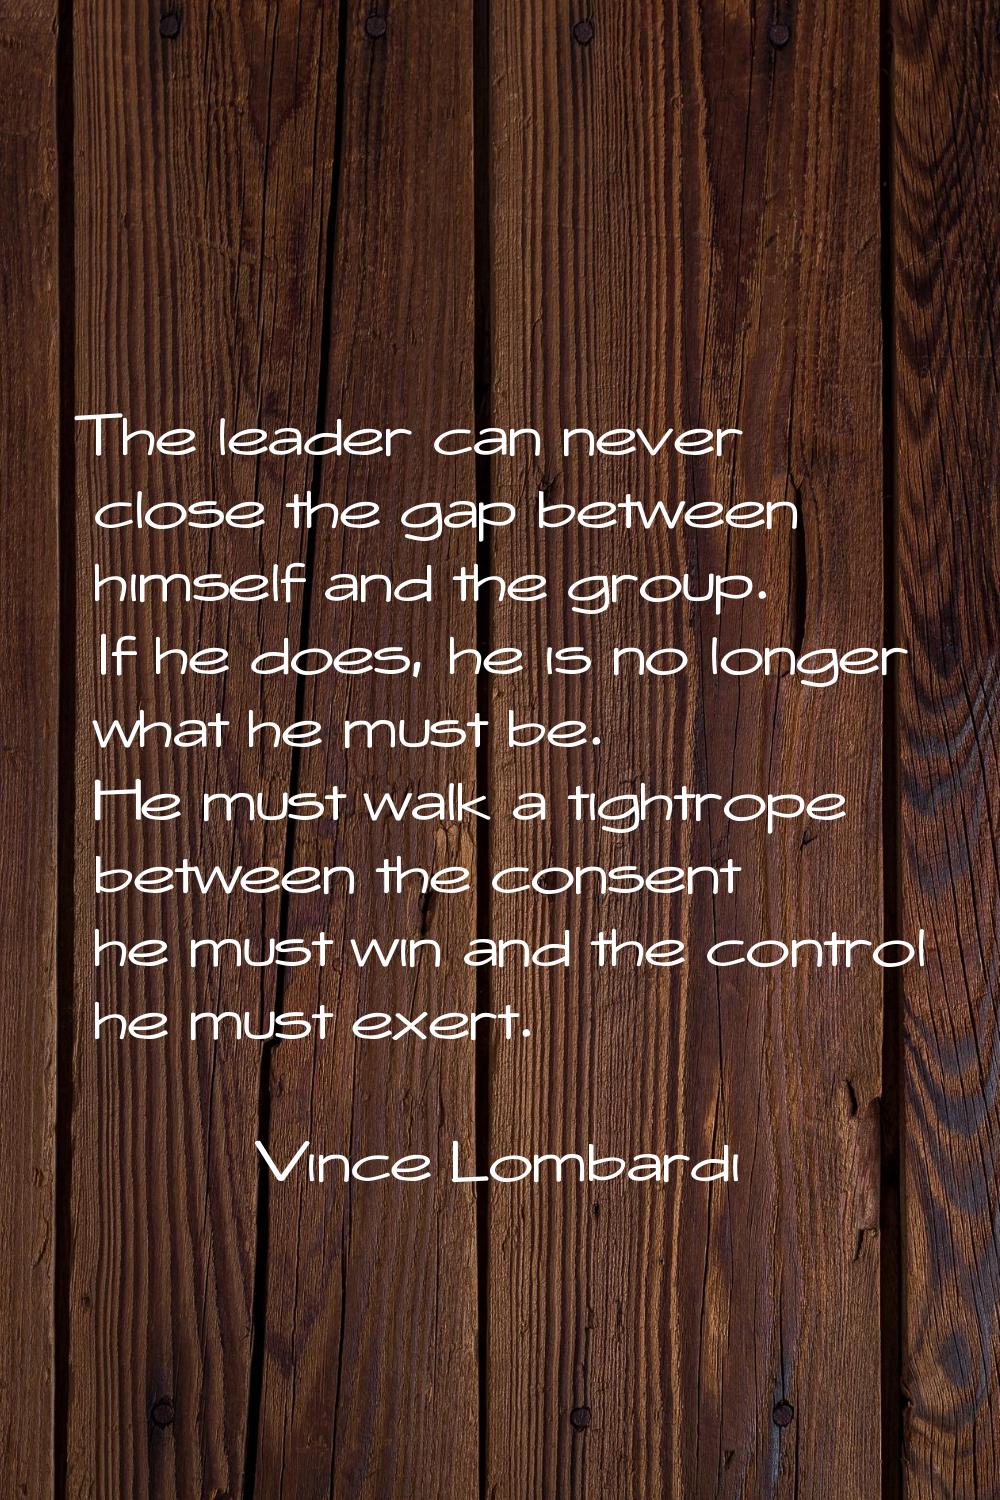 The leader can never close the gap between himself and the group. If he does, he is no longer what 